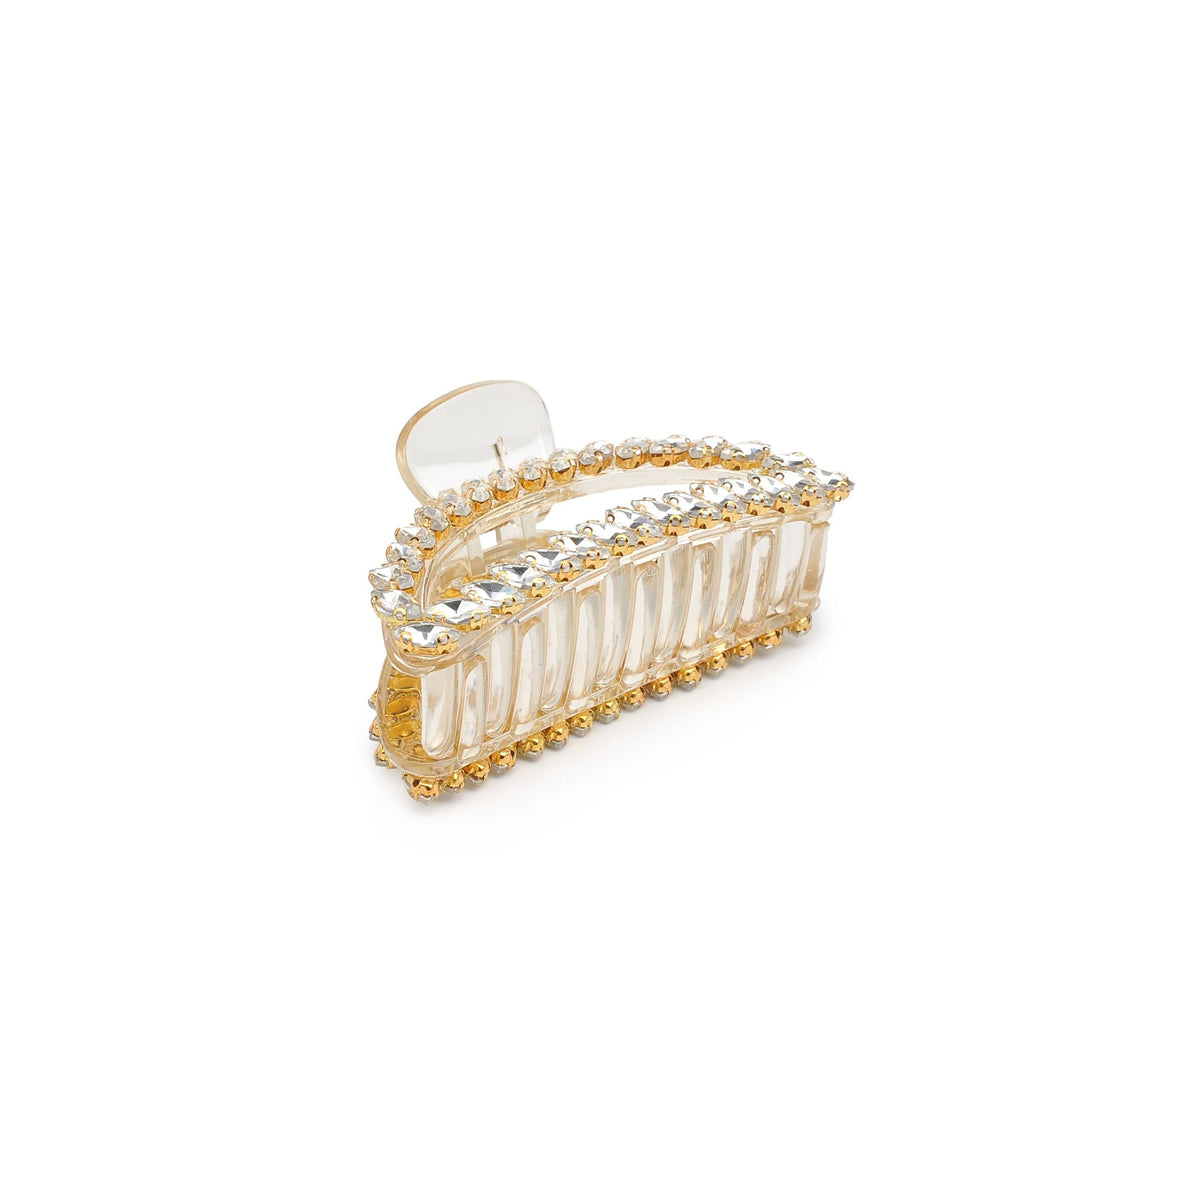 Product Image of Urban Expressions Camilla - Rhinestone Embellished Hair Claw Hair Claw 818209013871 View 1 | Clear